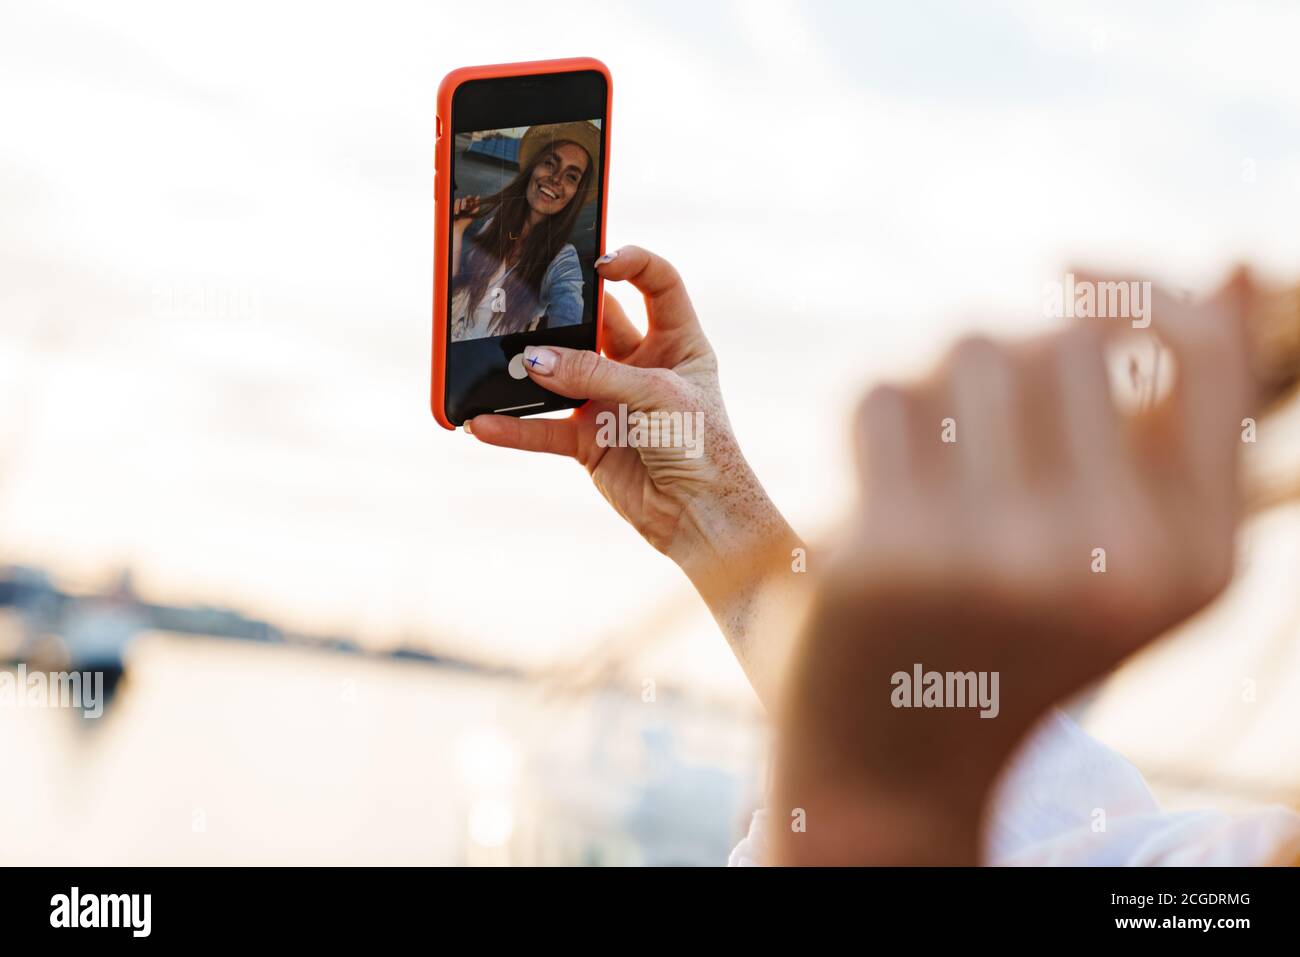 Image of laughing ginger woman smiling and taking selfie on mobile phone at promenade Stock Photo